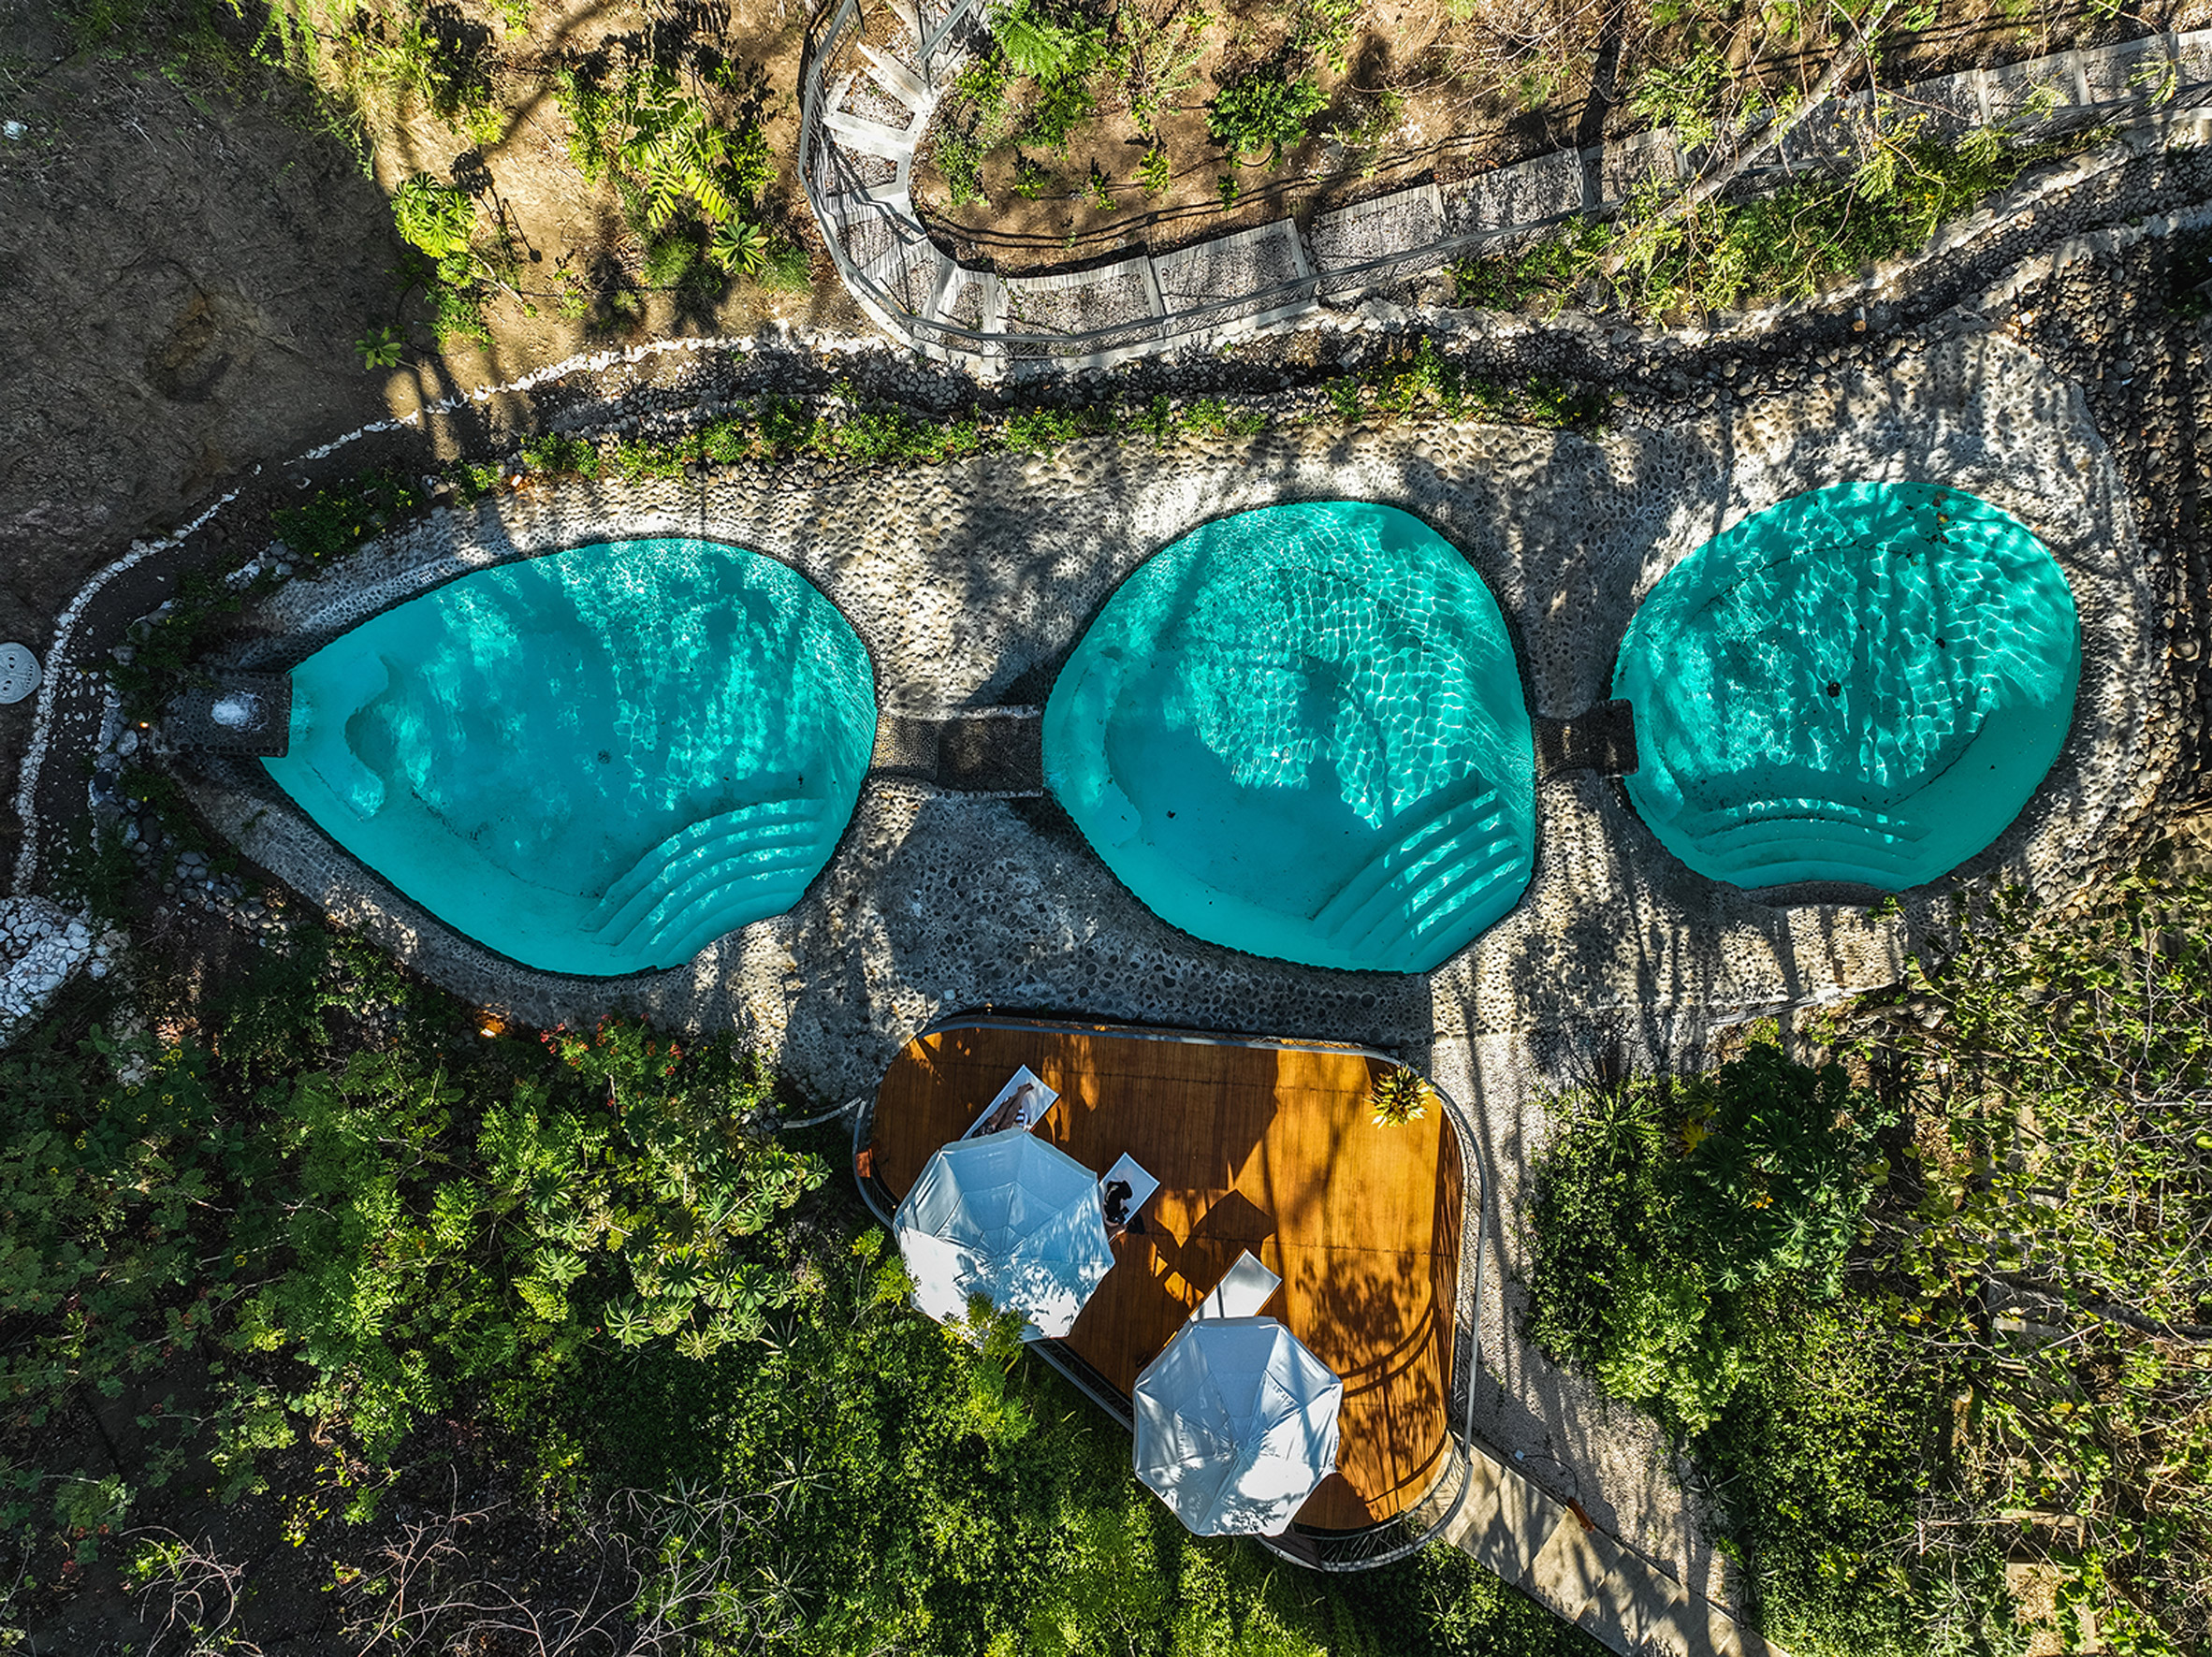 Rounded swimming pools